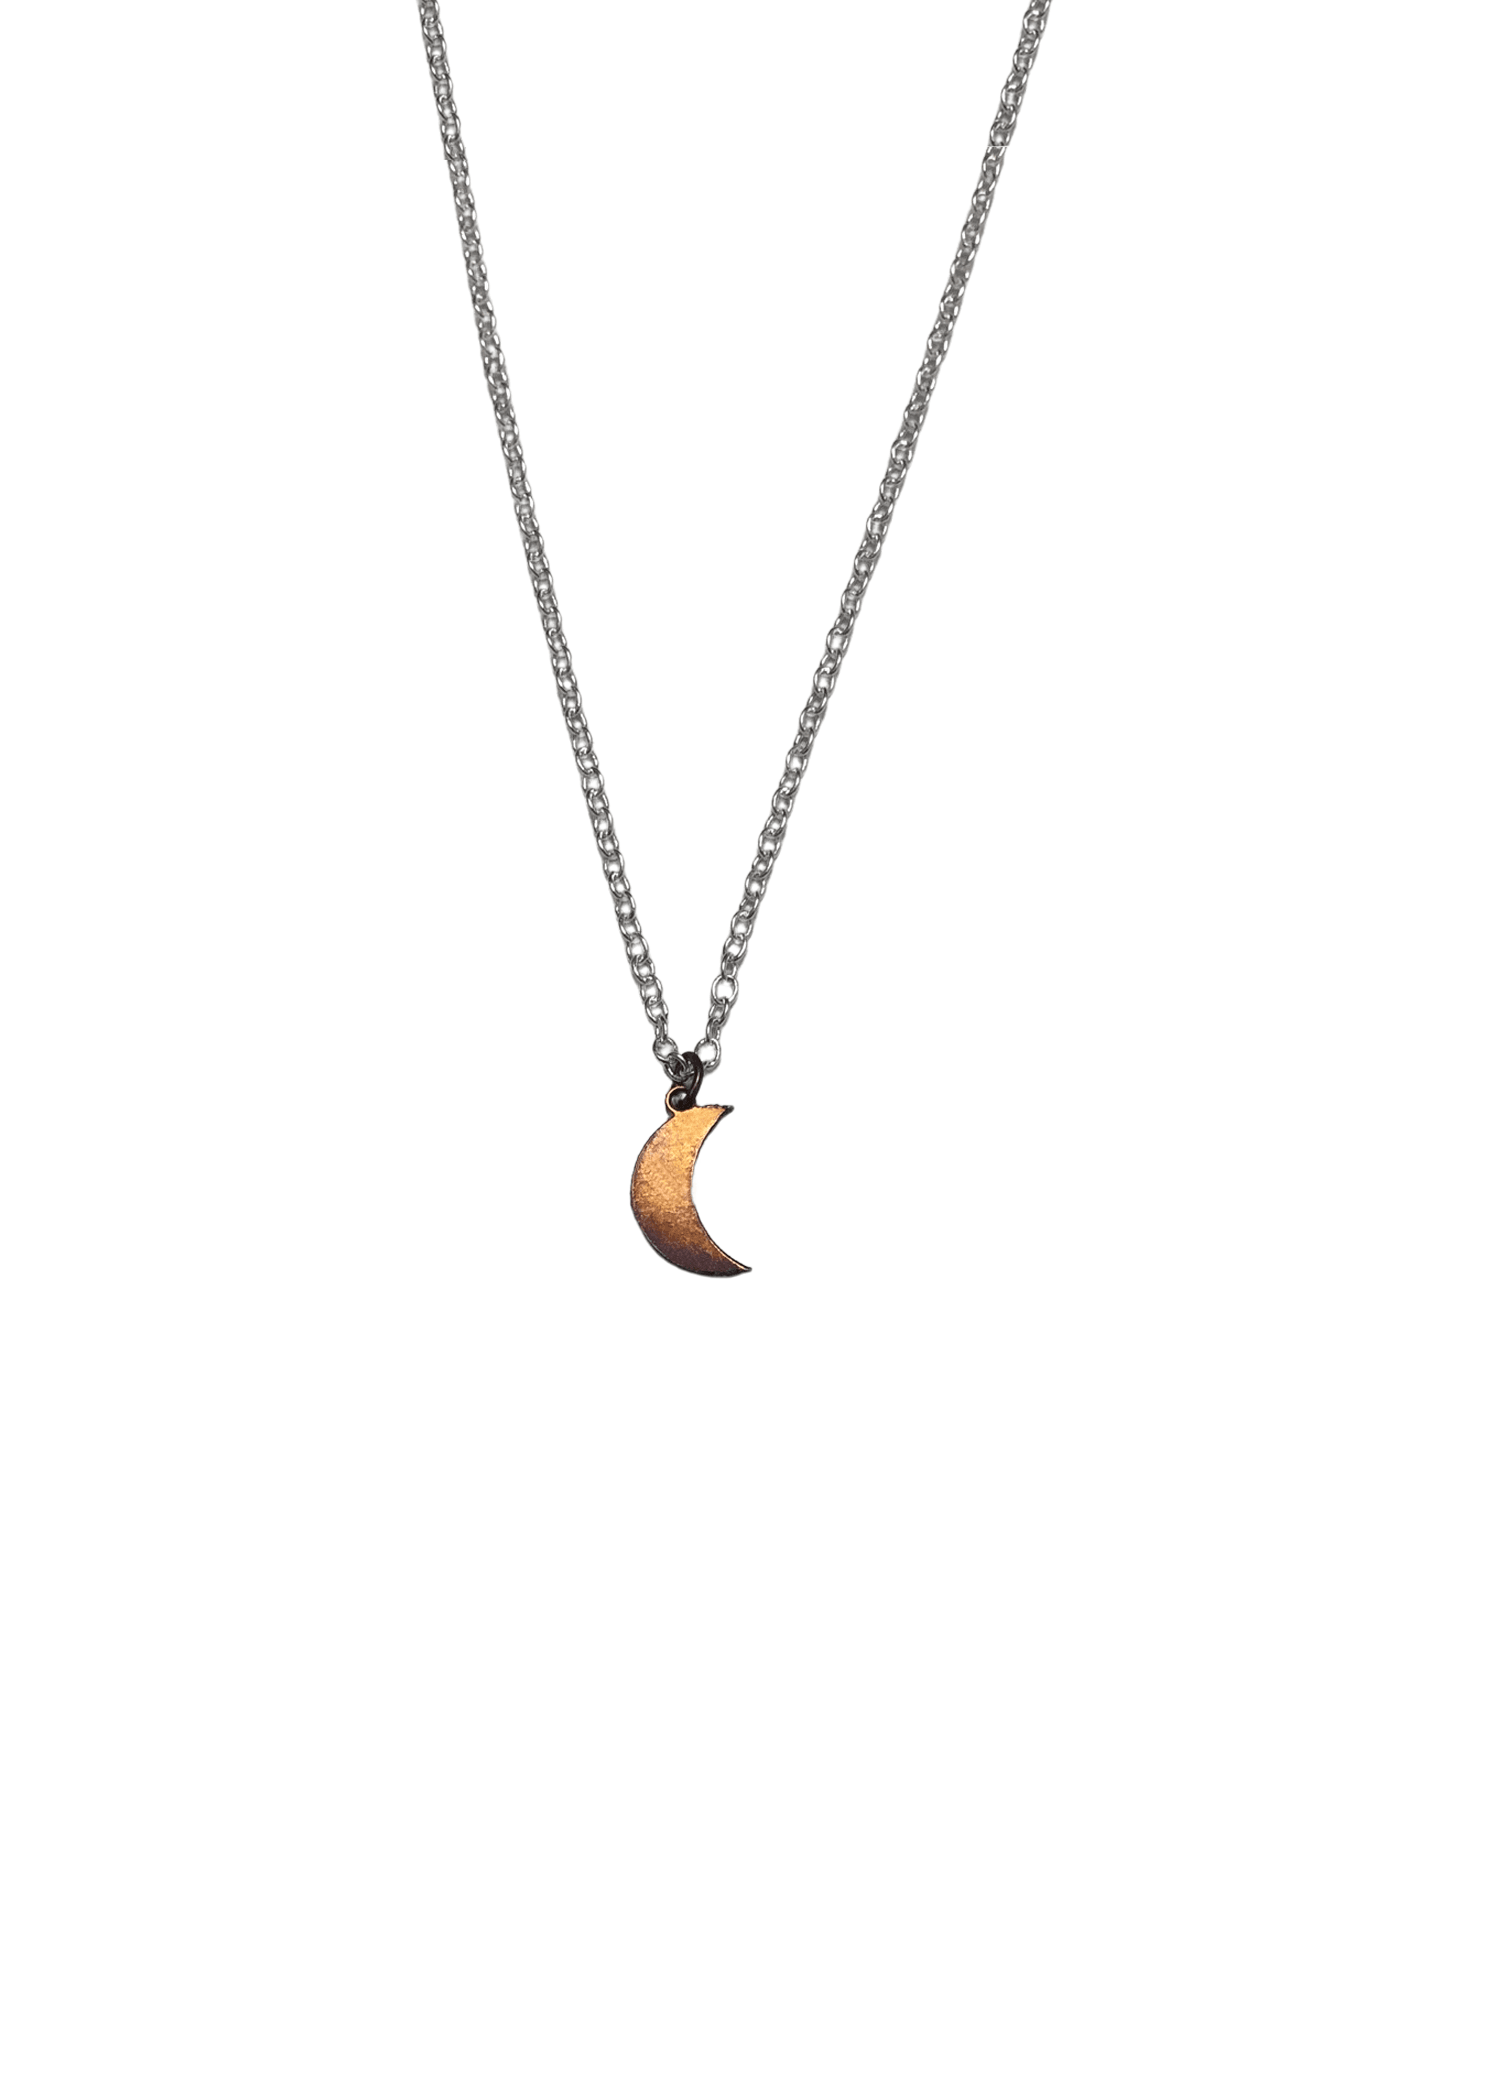 Moon Charm Necklace - Silver/Rose Vermeil - offe market